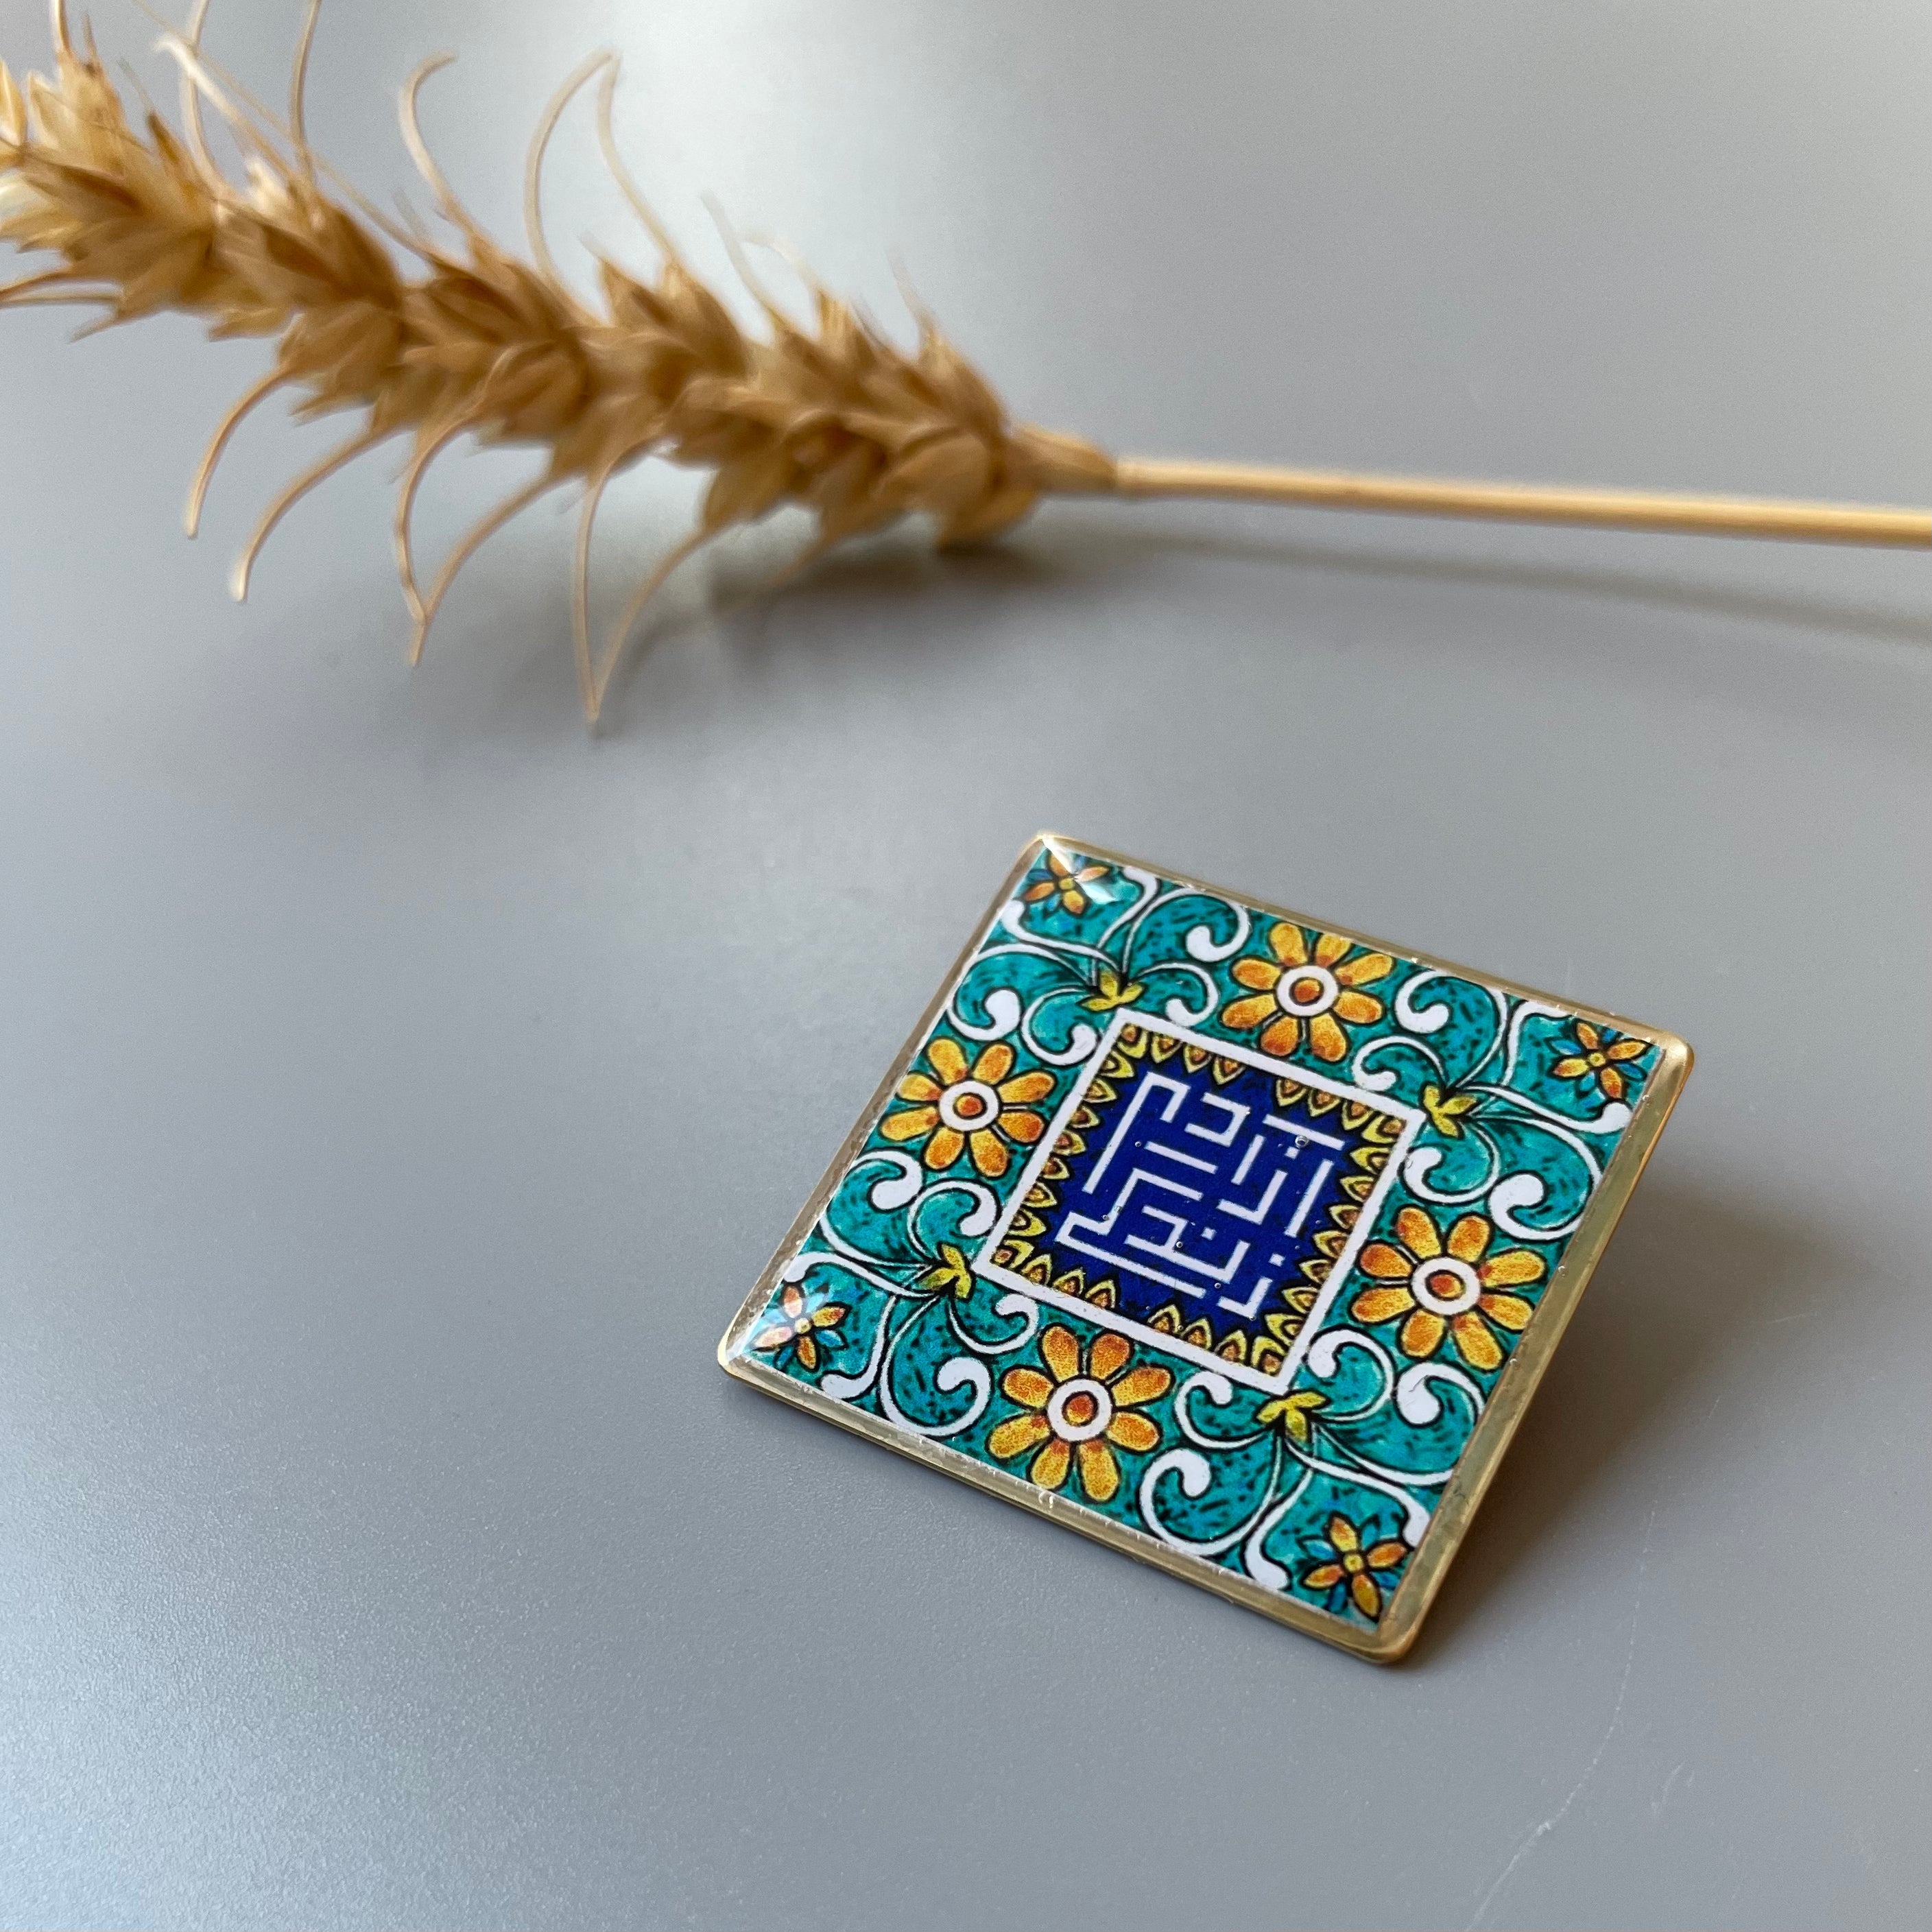 Persian Earrings-Symbolic Square Brooch with " Woman Life Freedom" Slogan:Persian Jewelry-AFRA ART GALLERY